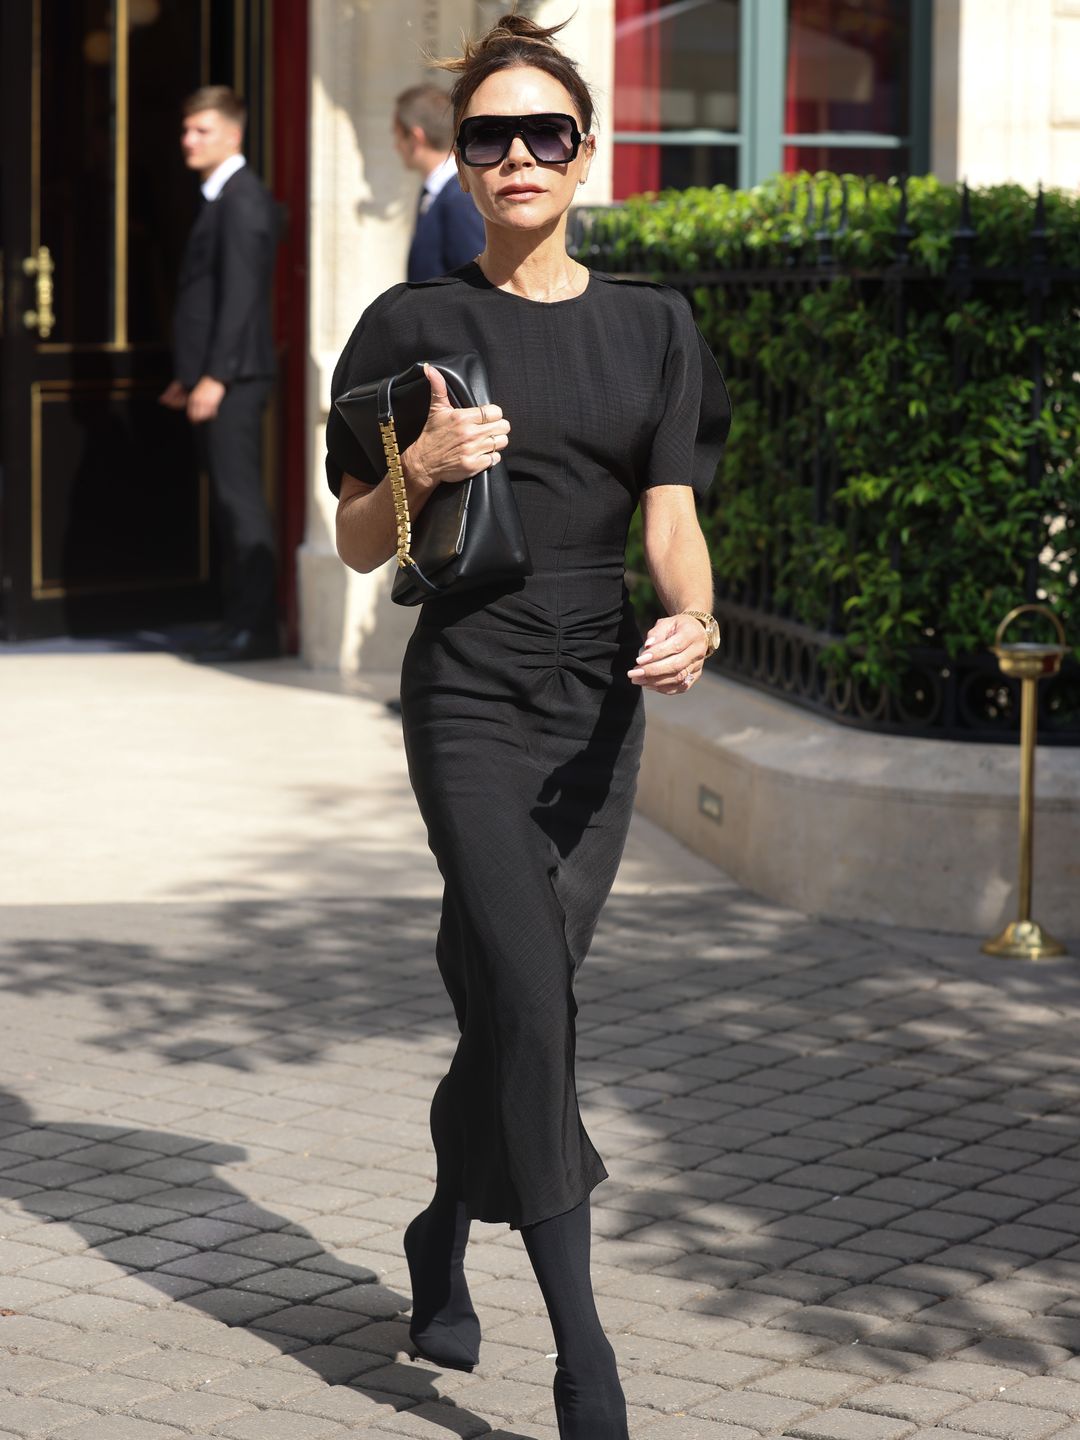 PARIS, FRANCE - SEPTEMBER 30: Victoria Beckham is seen leaving her Hotel on September 30, 2022 in Paris, France. (Photo by Pierre Suu/GC Images)